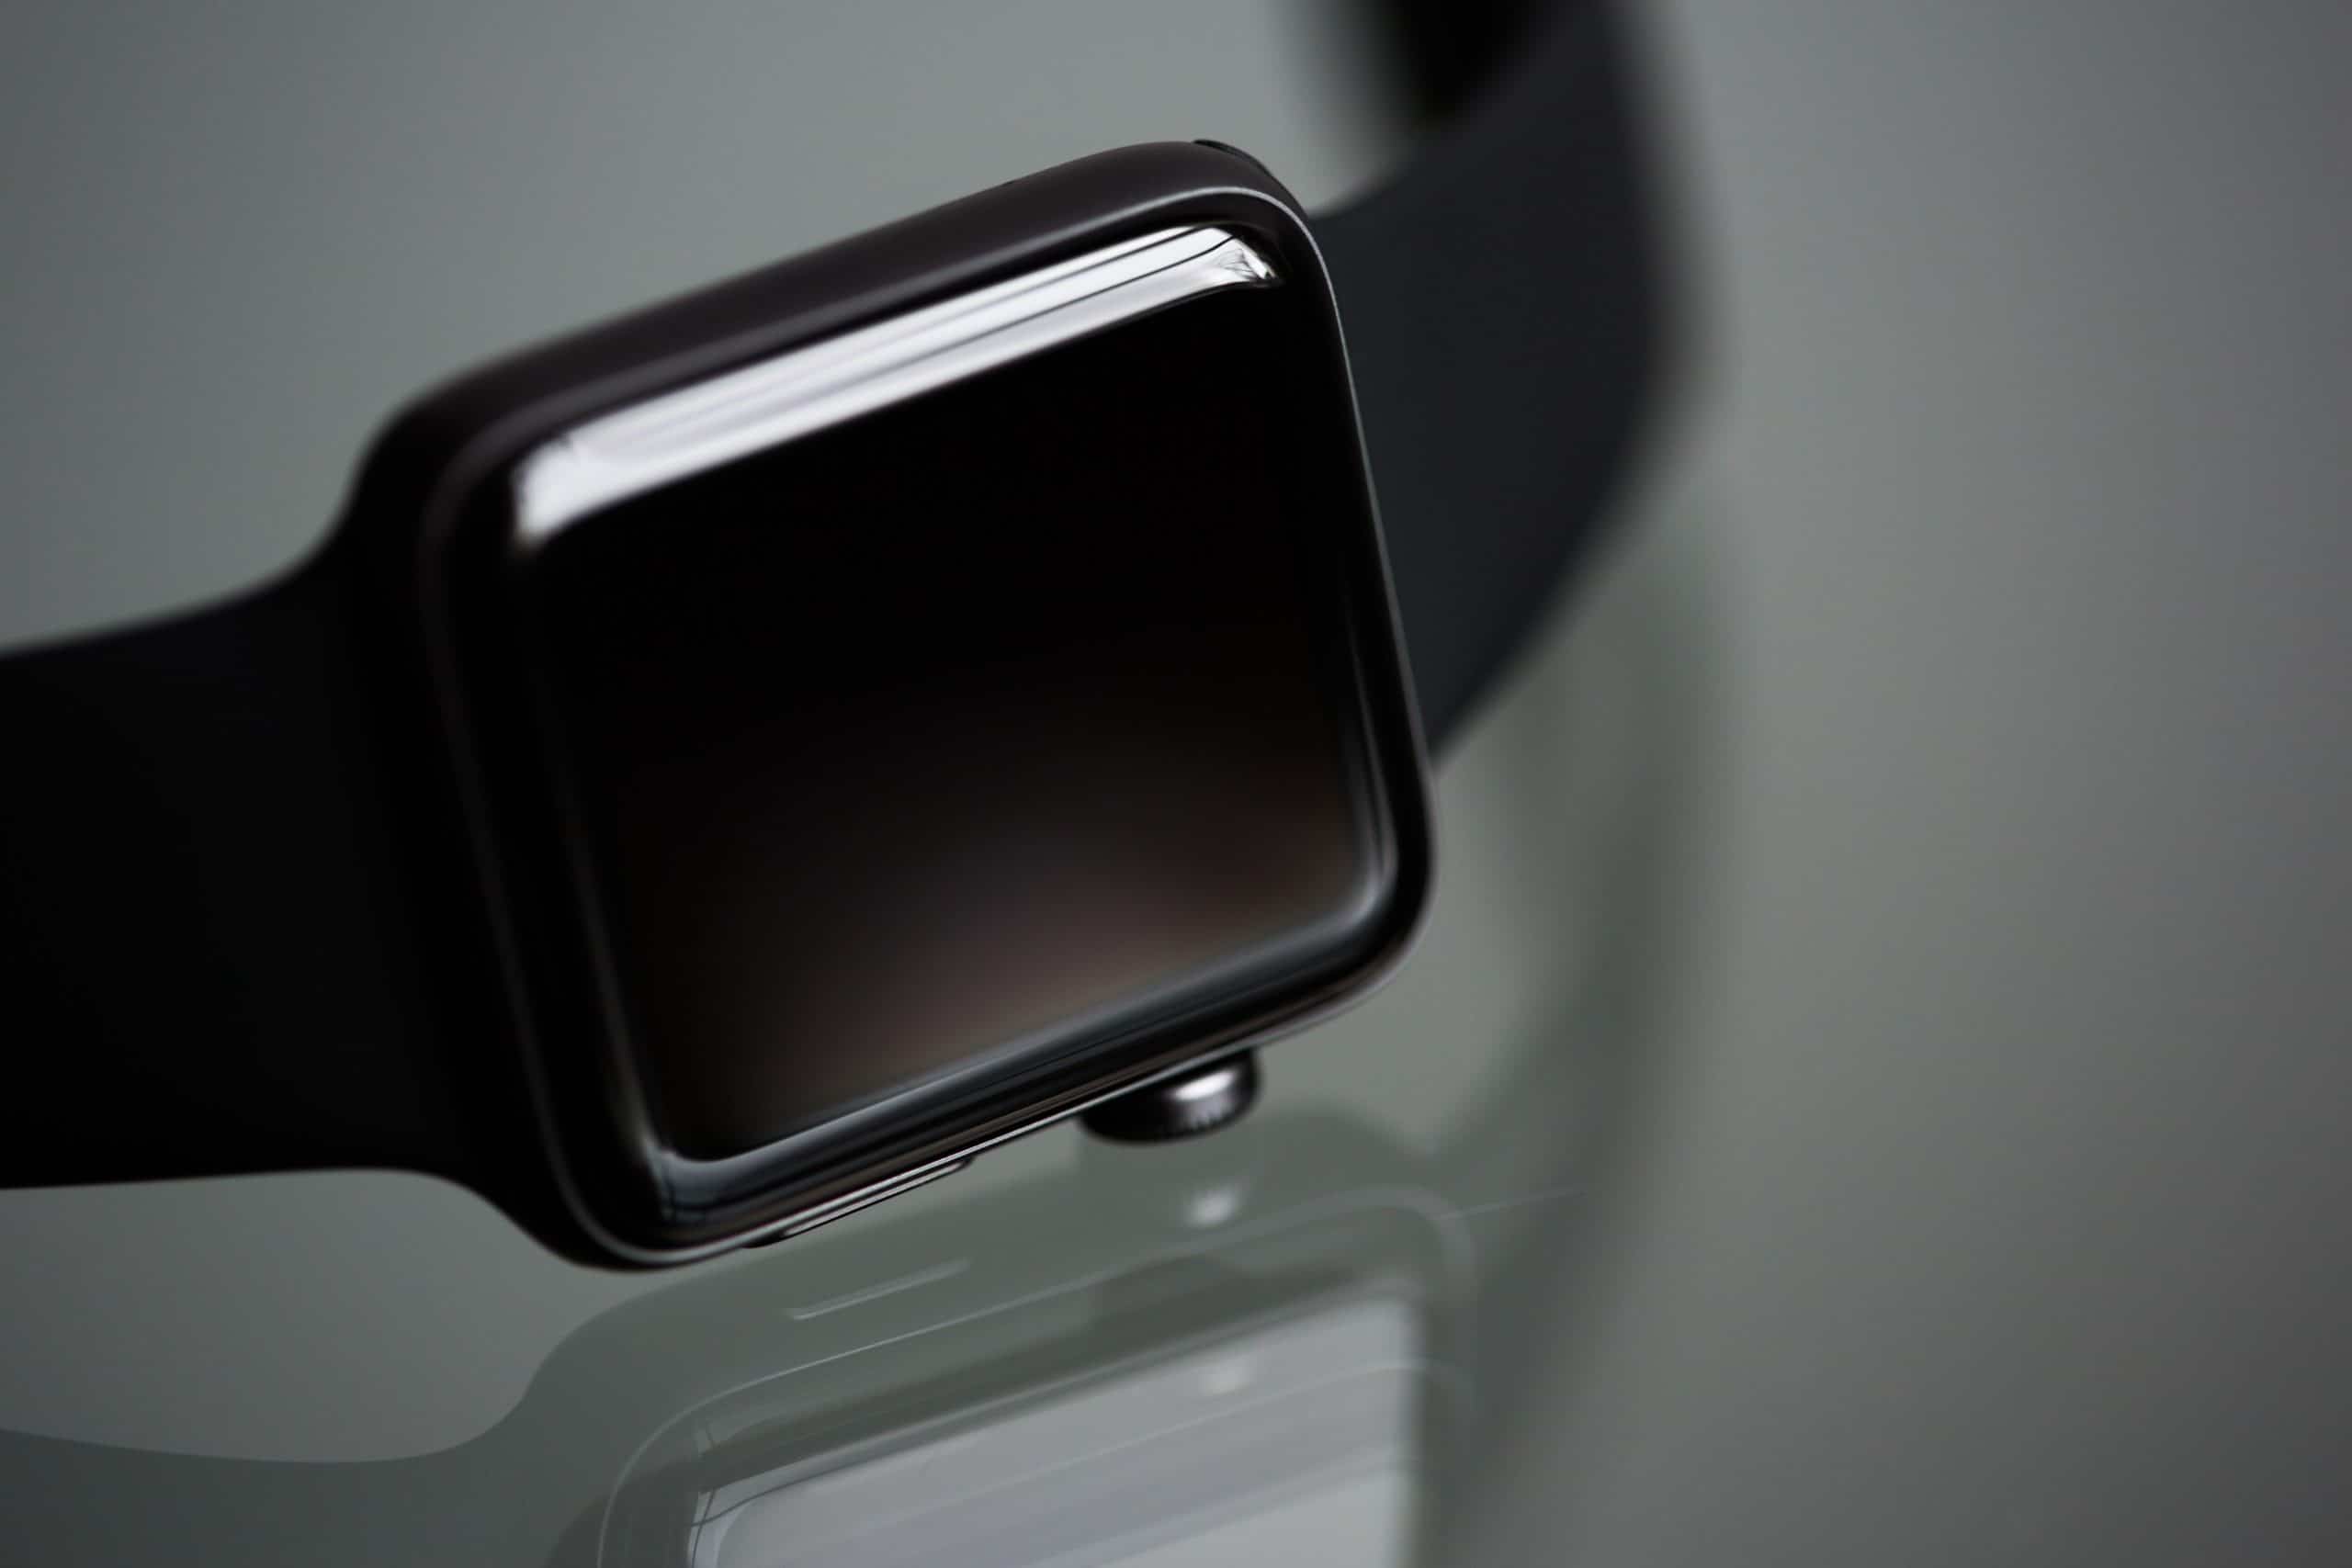 What Happens If You Buy a Stolen Apple Watch – Can You Go To Jail?